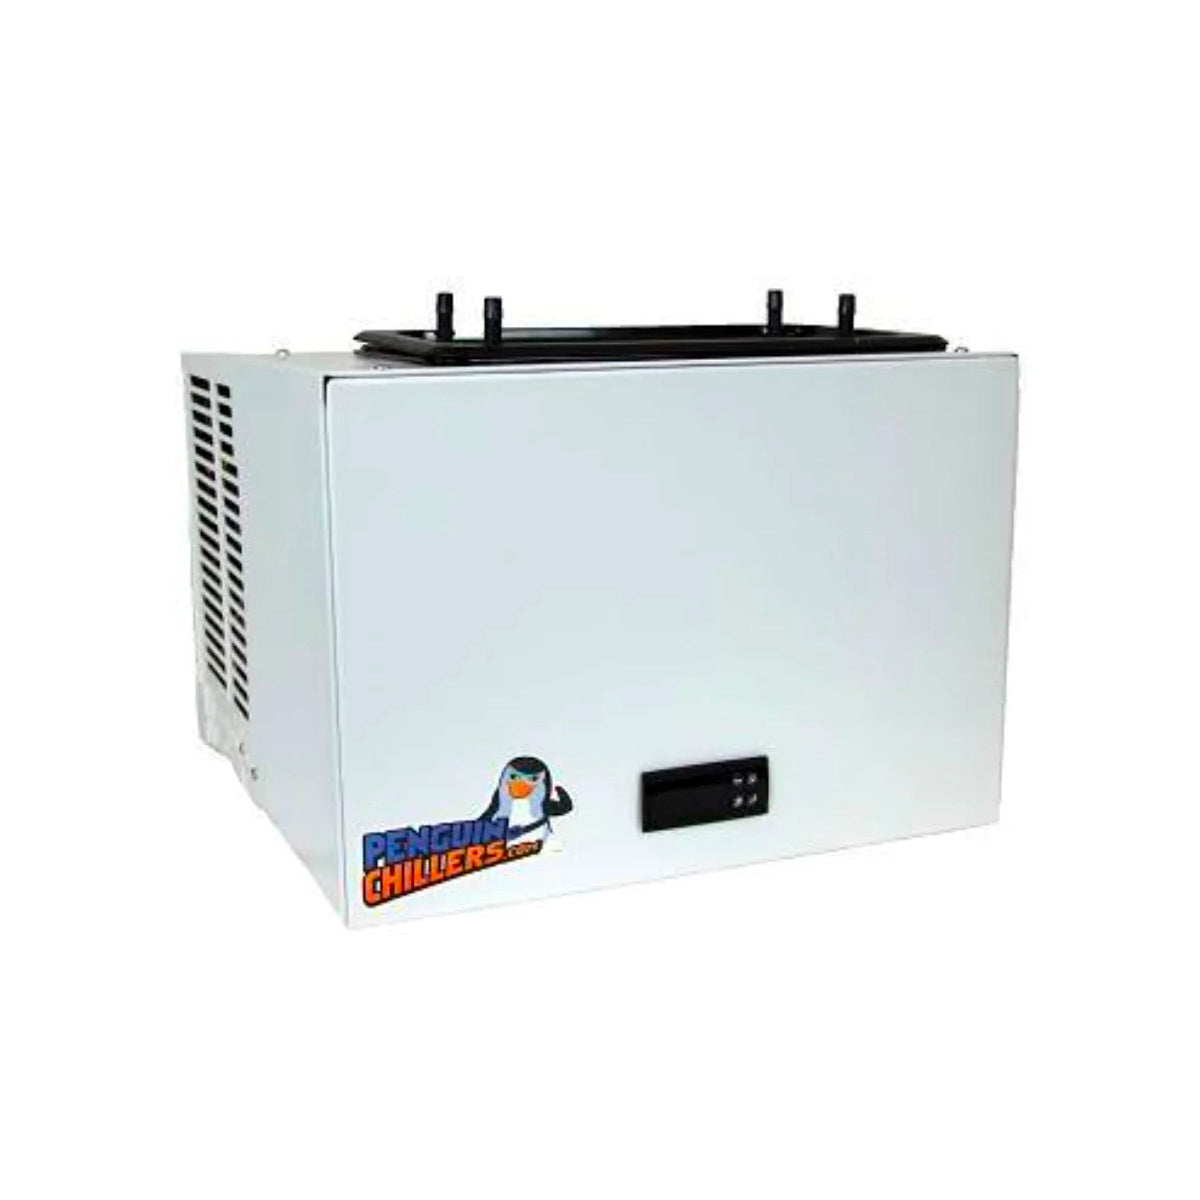 1/2 HP Homebrewing Glycol Chiller - Delta Brewing Systems